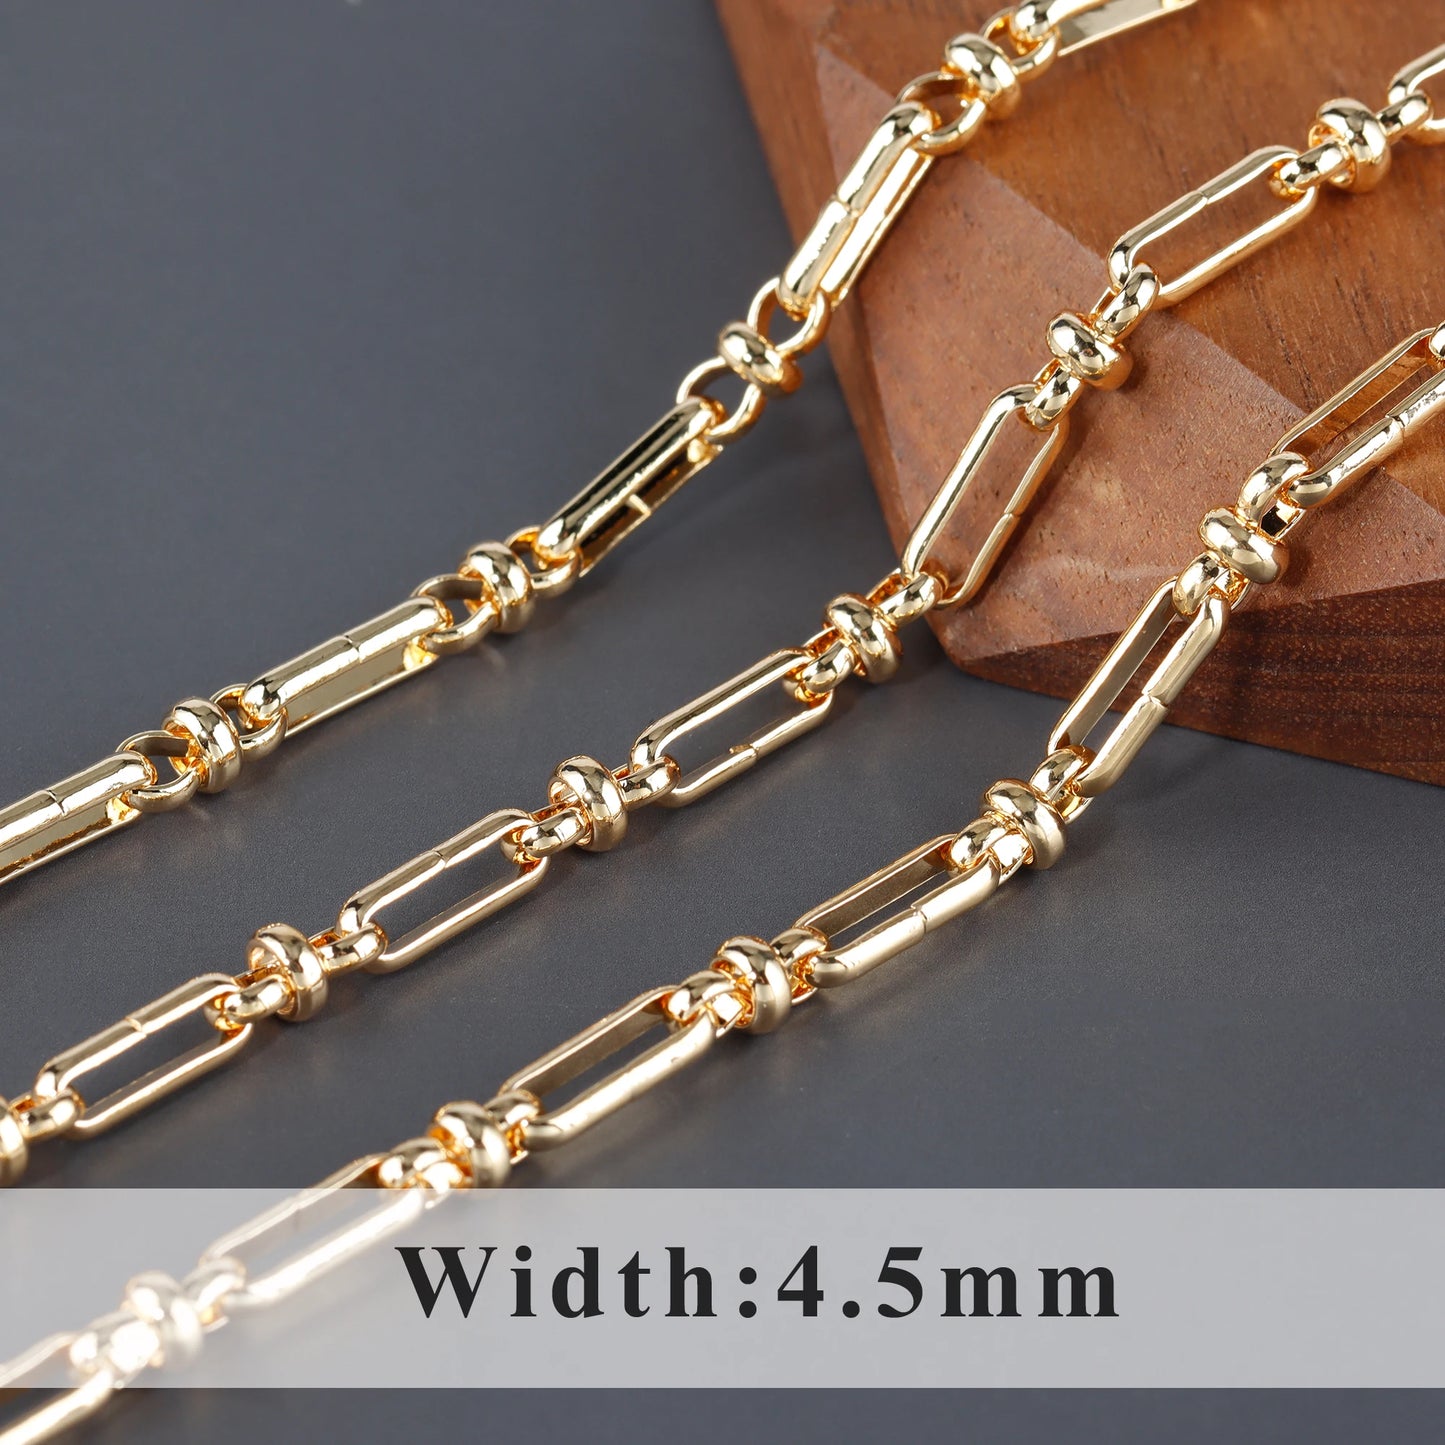 GUFEATHER C191,diy chain,pass REACH,nickel free,18k gold plated,copper metal,charms,diy bracelet necklace,jewelry making,1m/lot